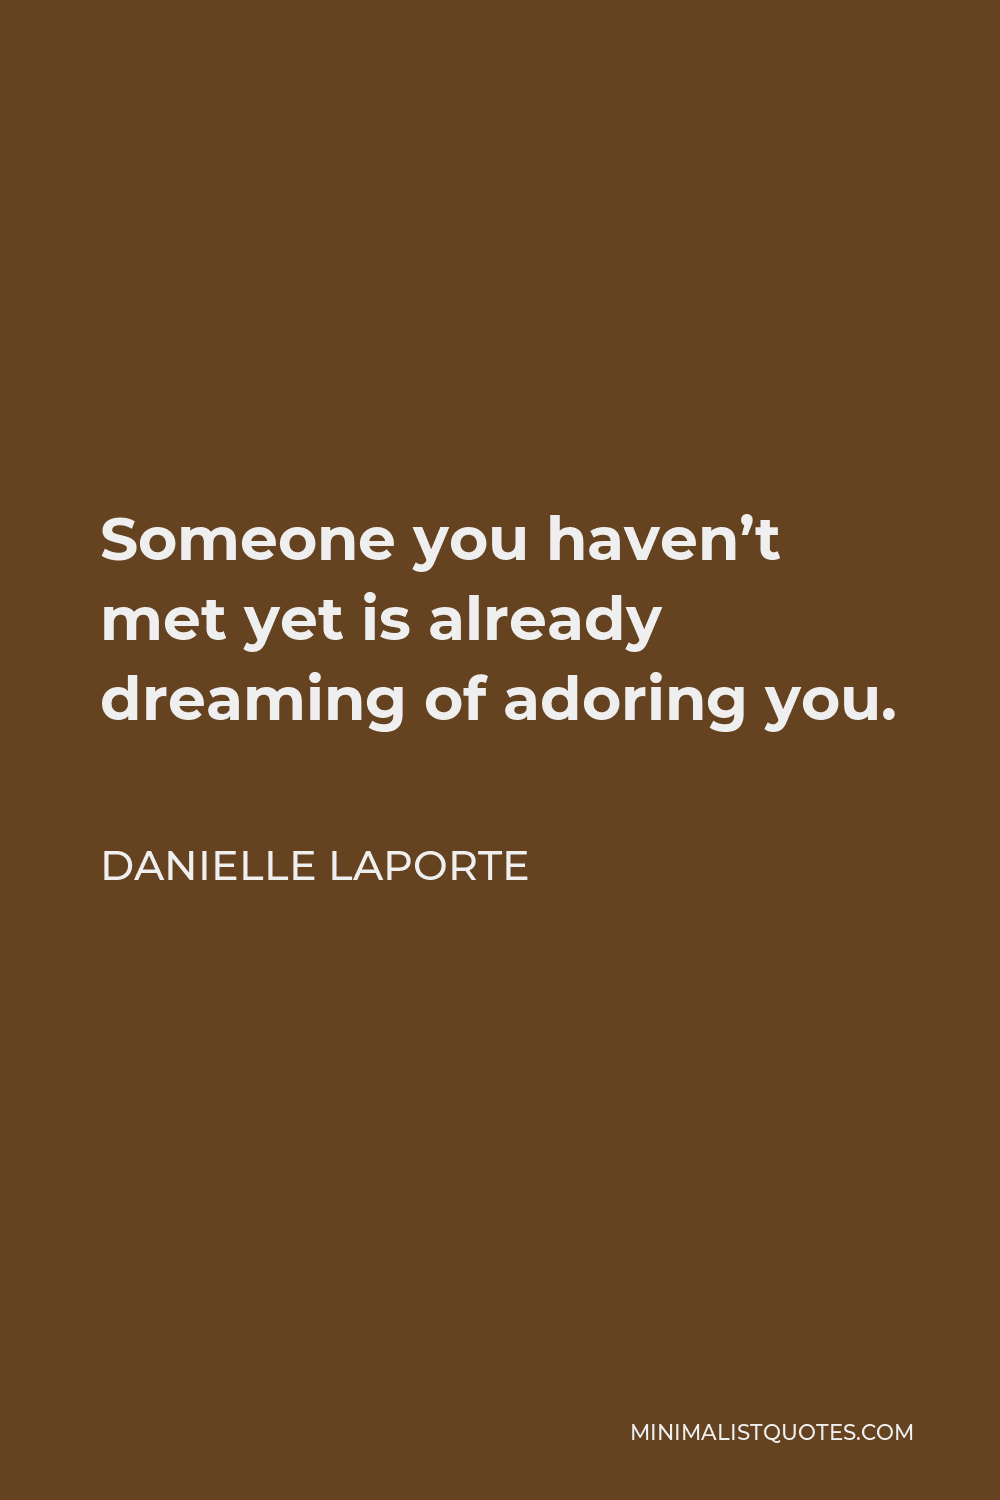 Danielle LaPorte Quote - Someone you haven’t met yet is already dreaming of adoring you.